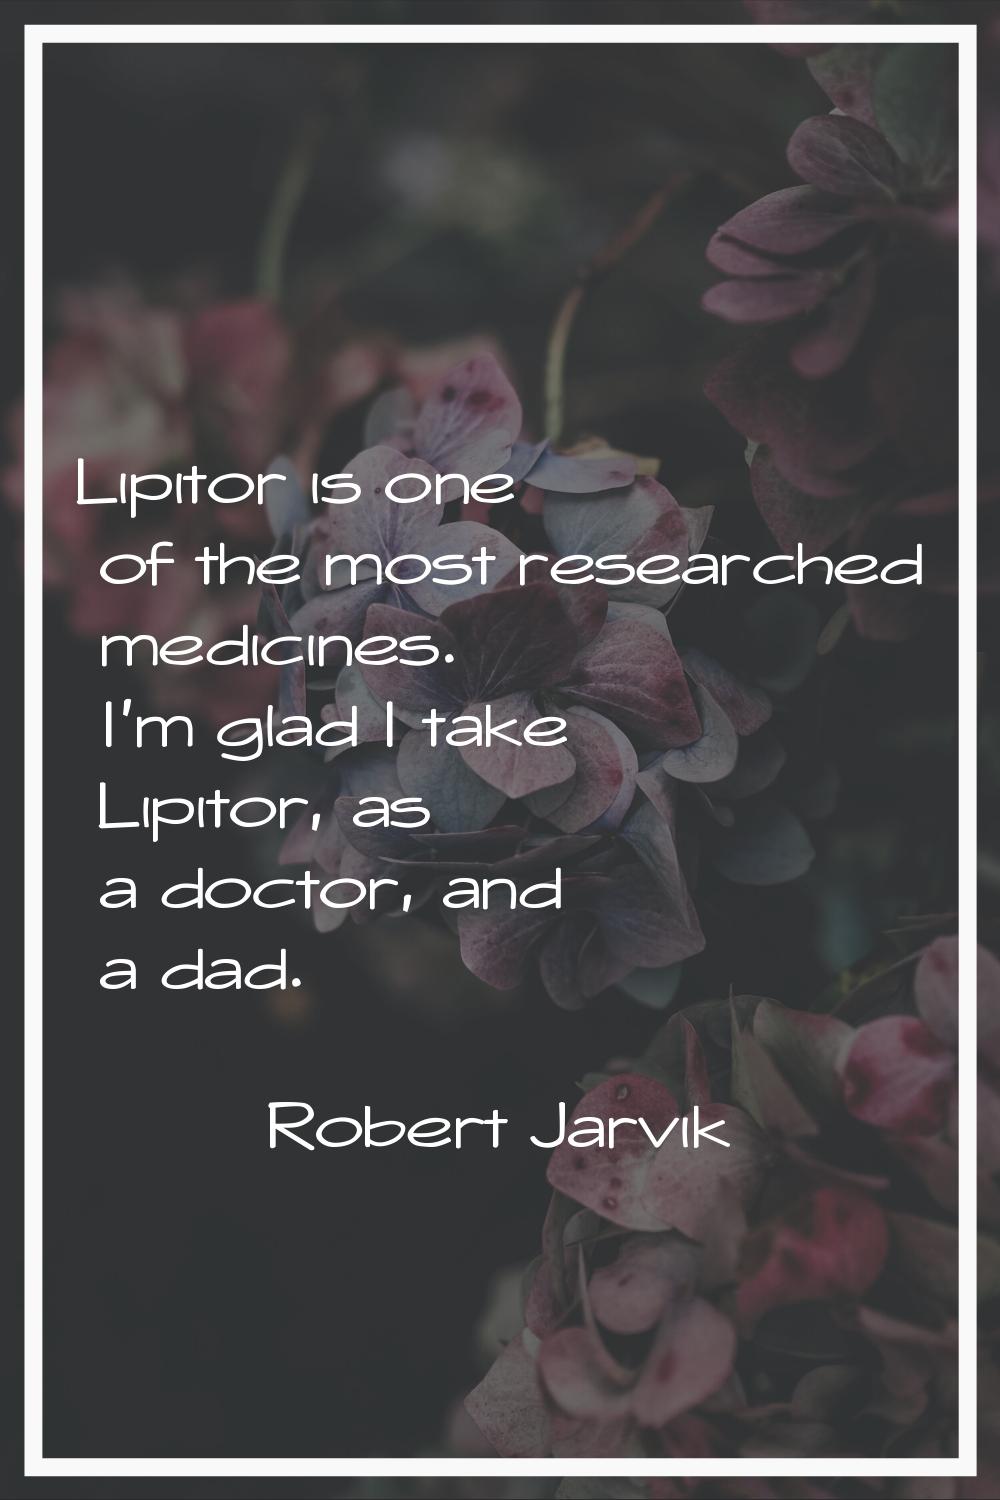 Lipitor is one of the most researched medicines. I'm glad I take Lipitor, as a doctor, and a dad.